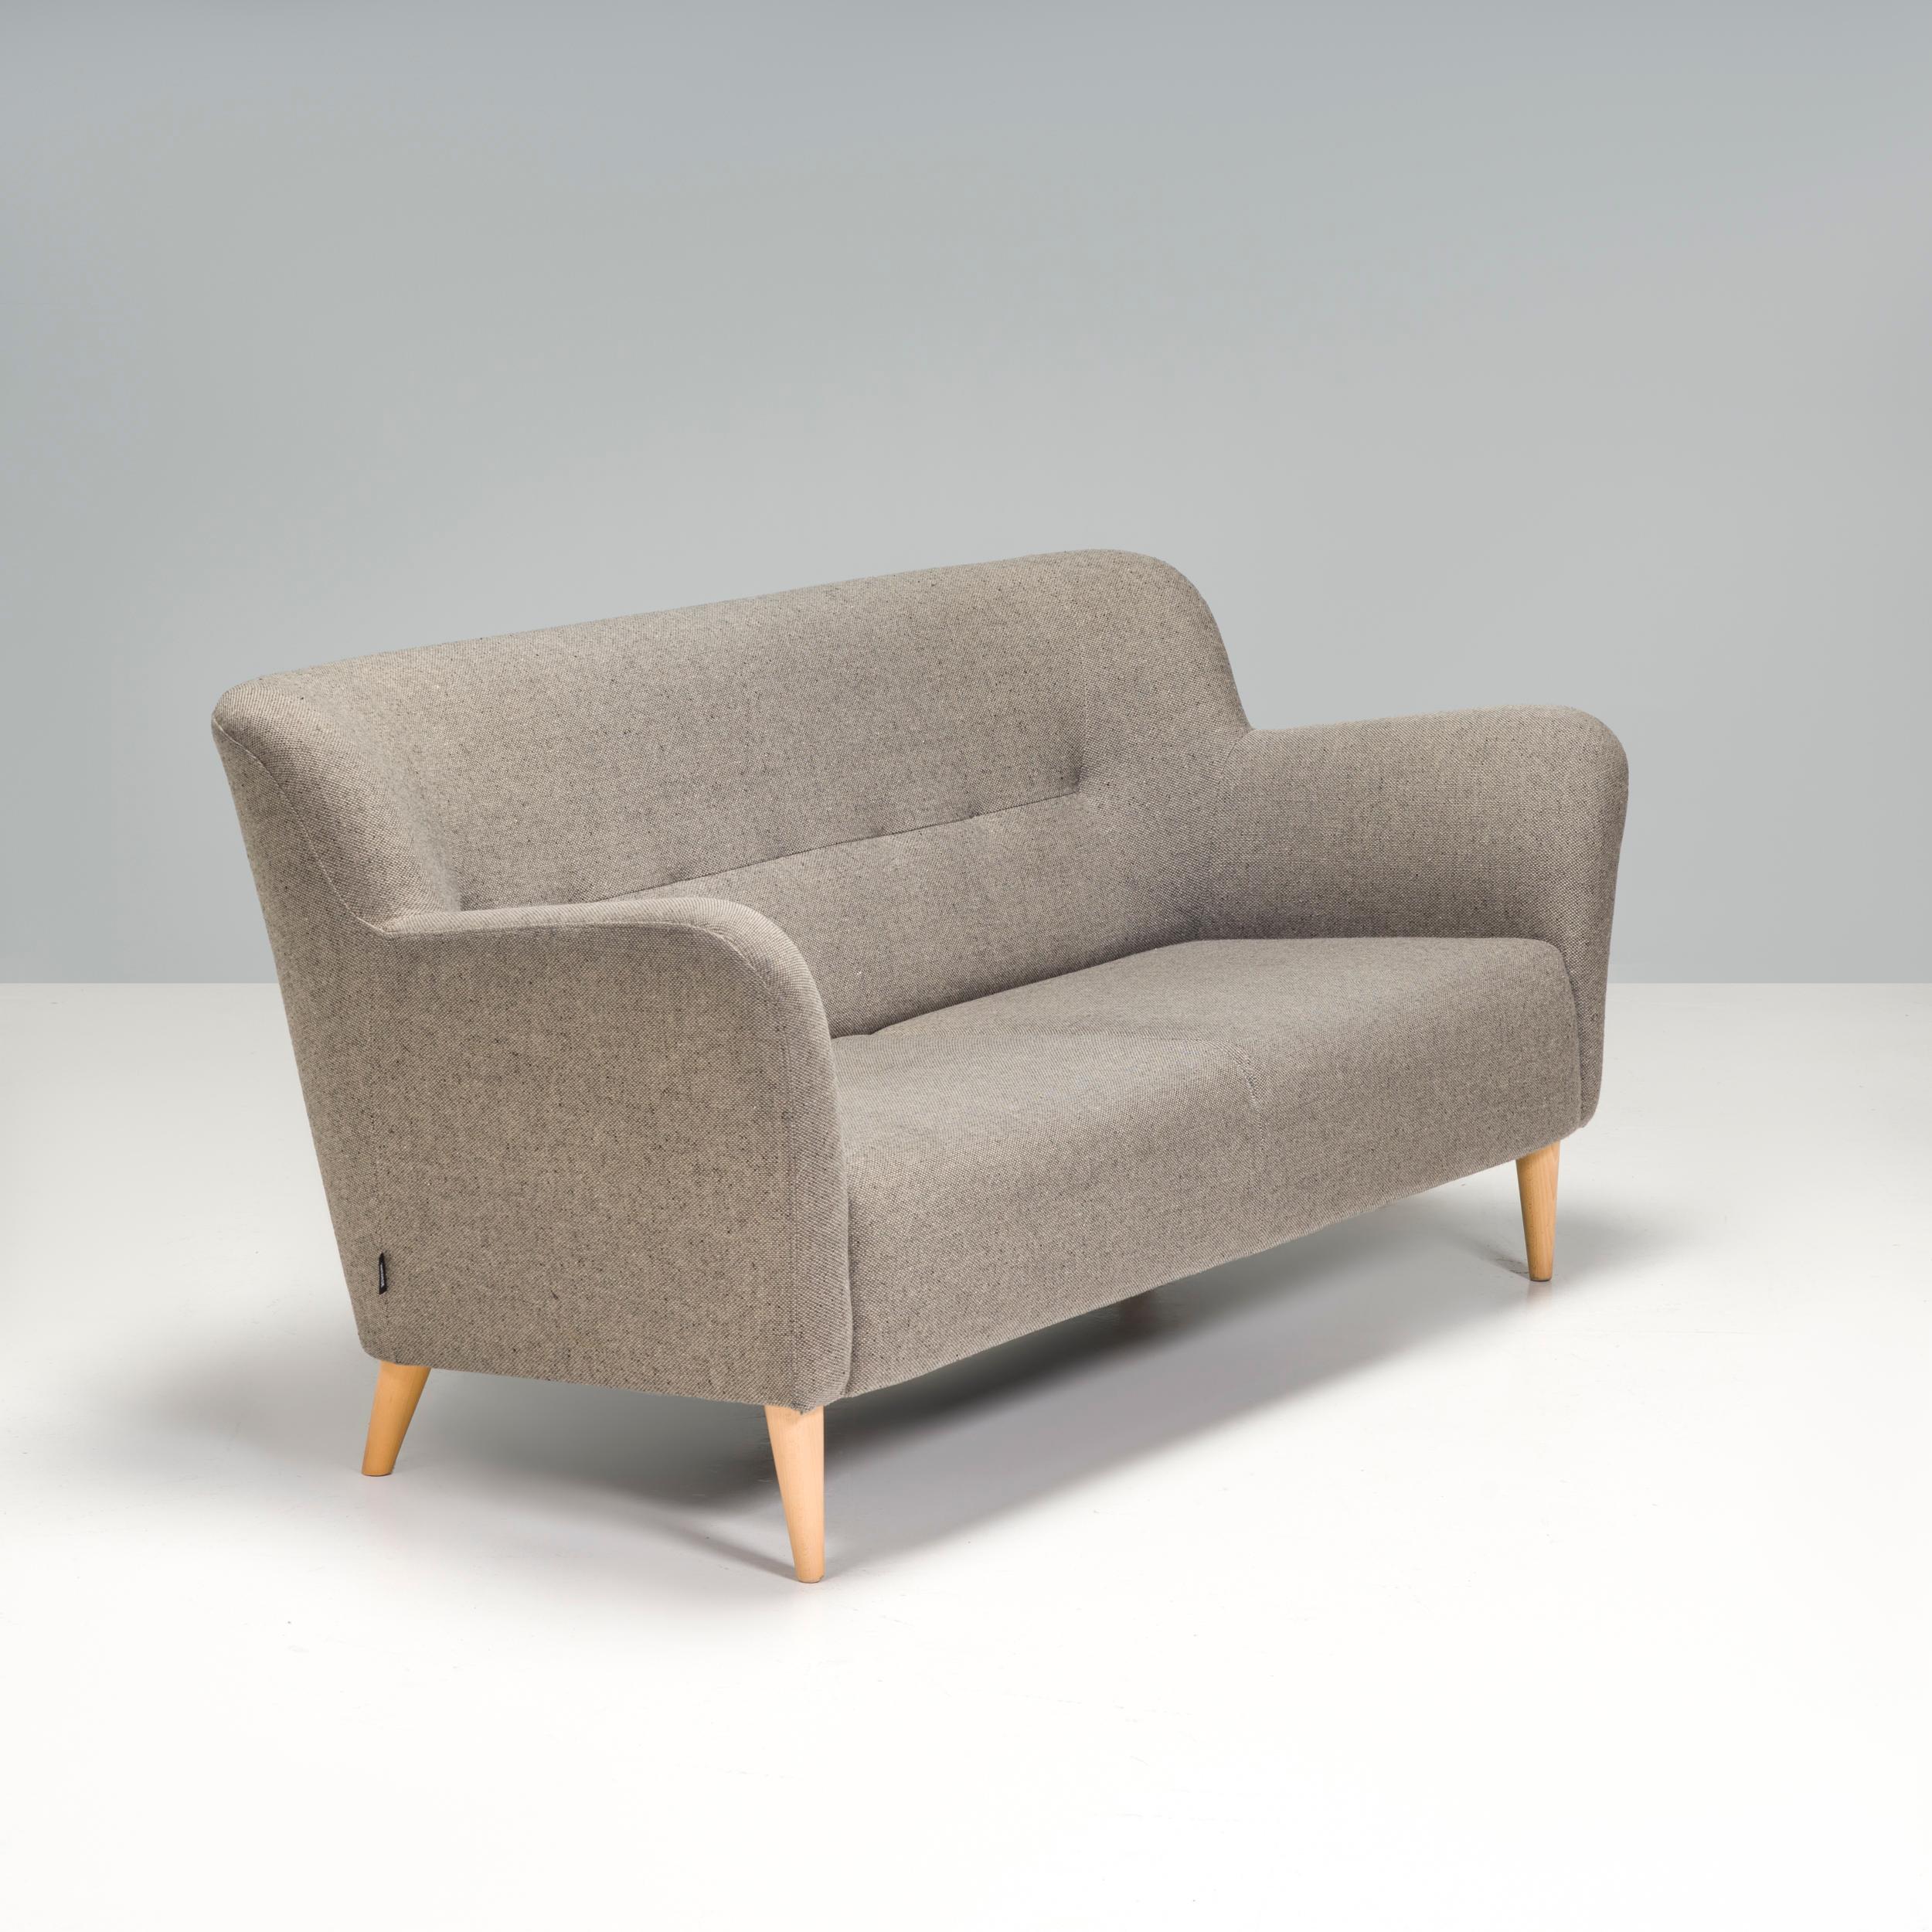 
The Swedese Nova 2 Seater Sofa, designed by Claesson Koivisto Rune for Swedese, is a two seater sofa with a distinctive yet classic form. 

The deep seat and high sculptured armrests propose an alluring and striking profile which accentuates